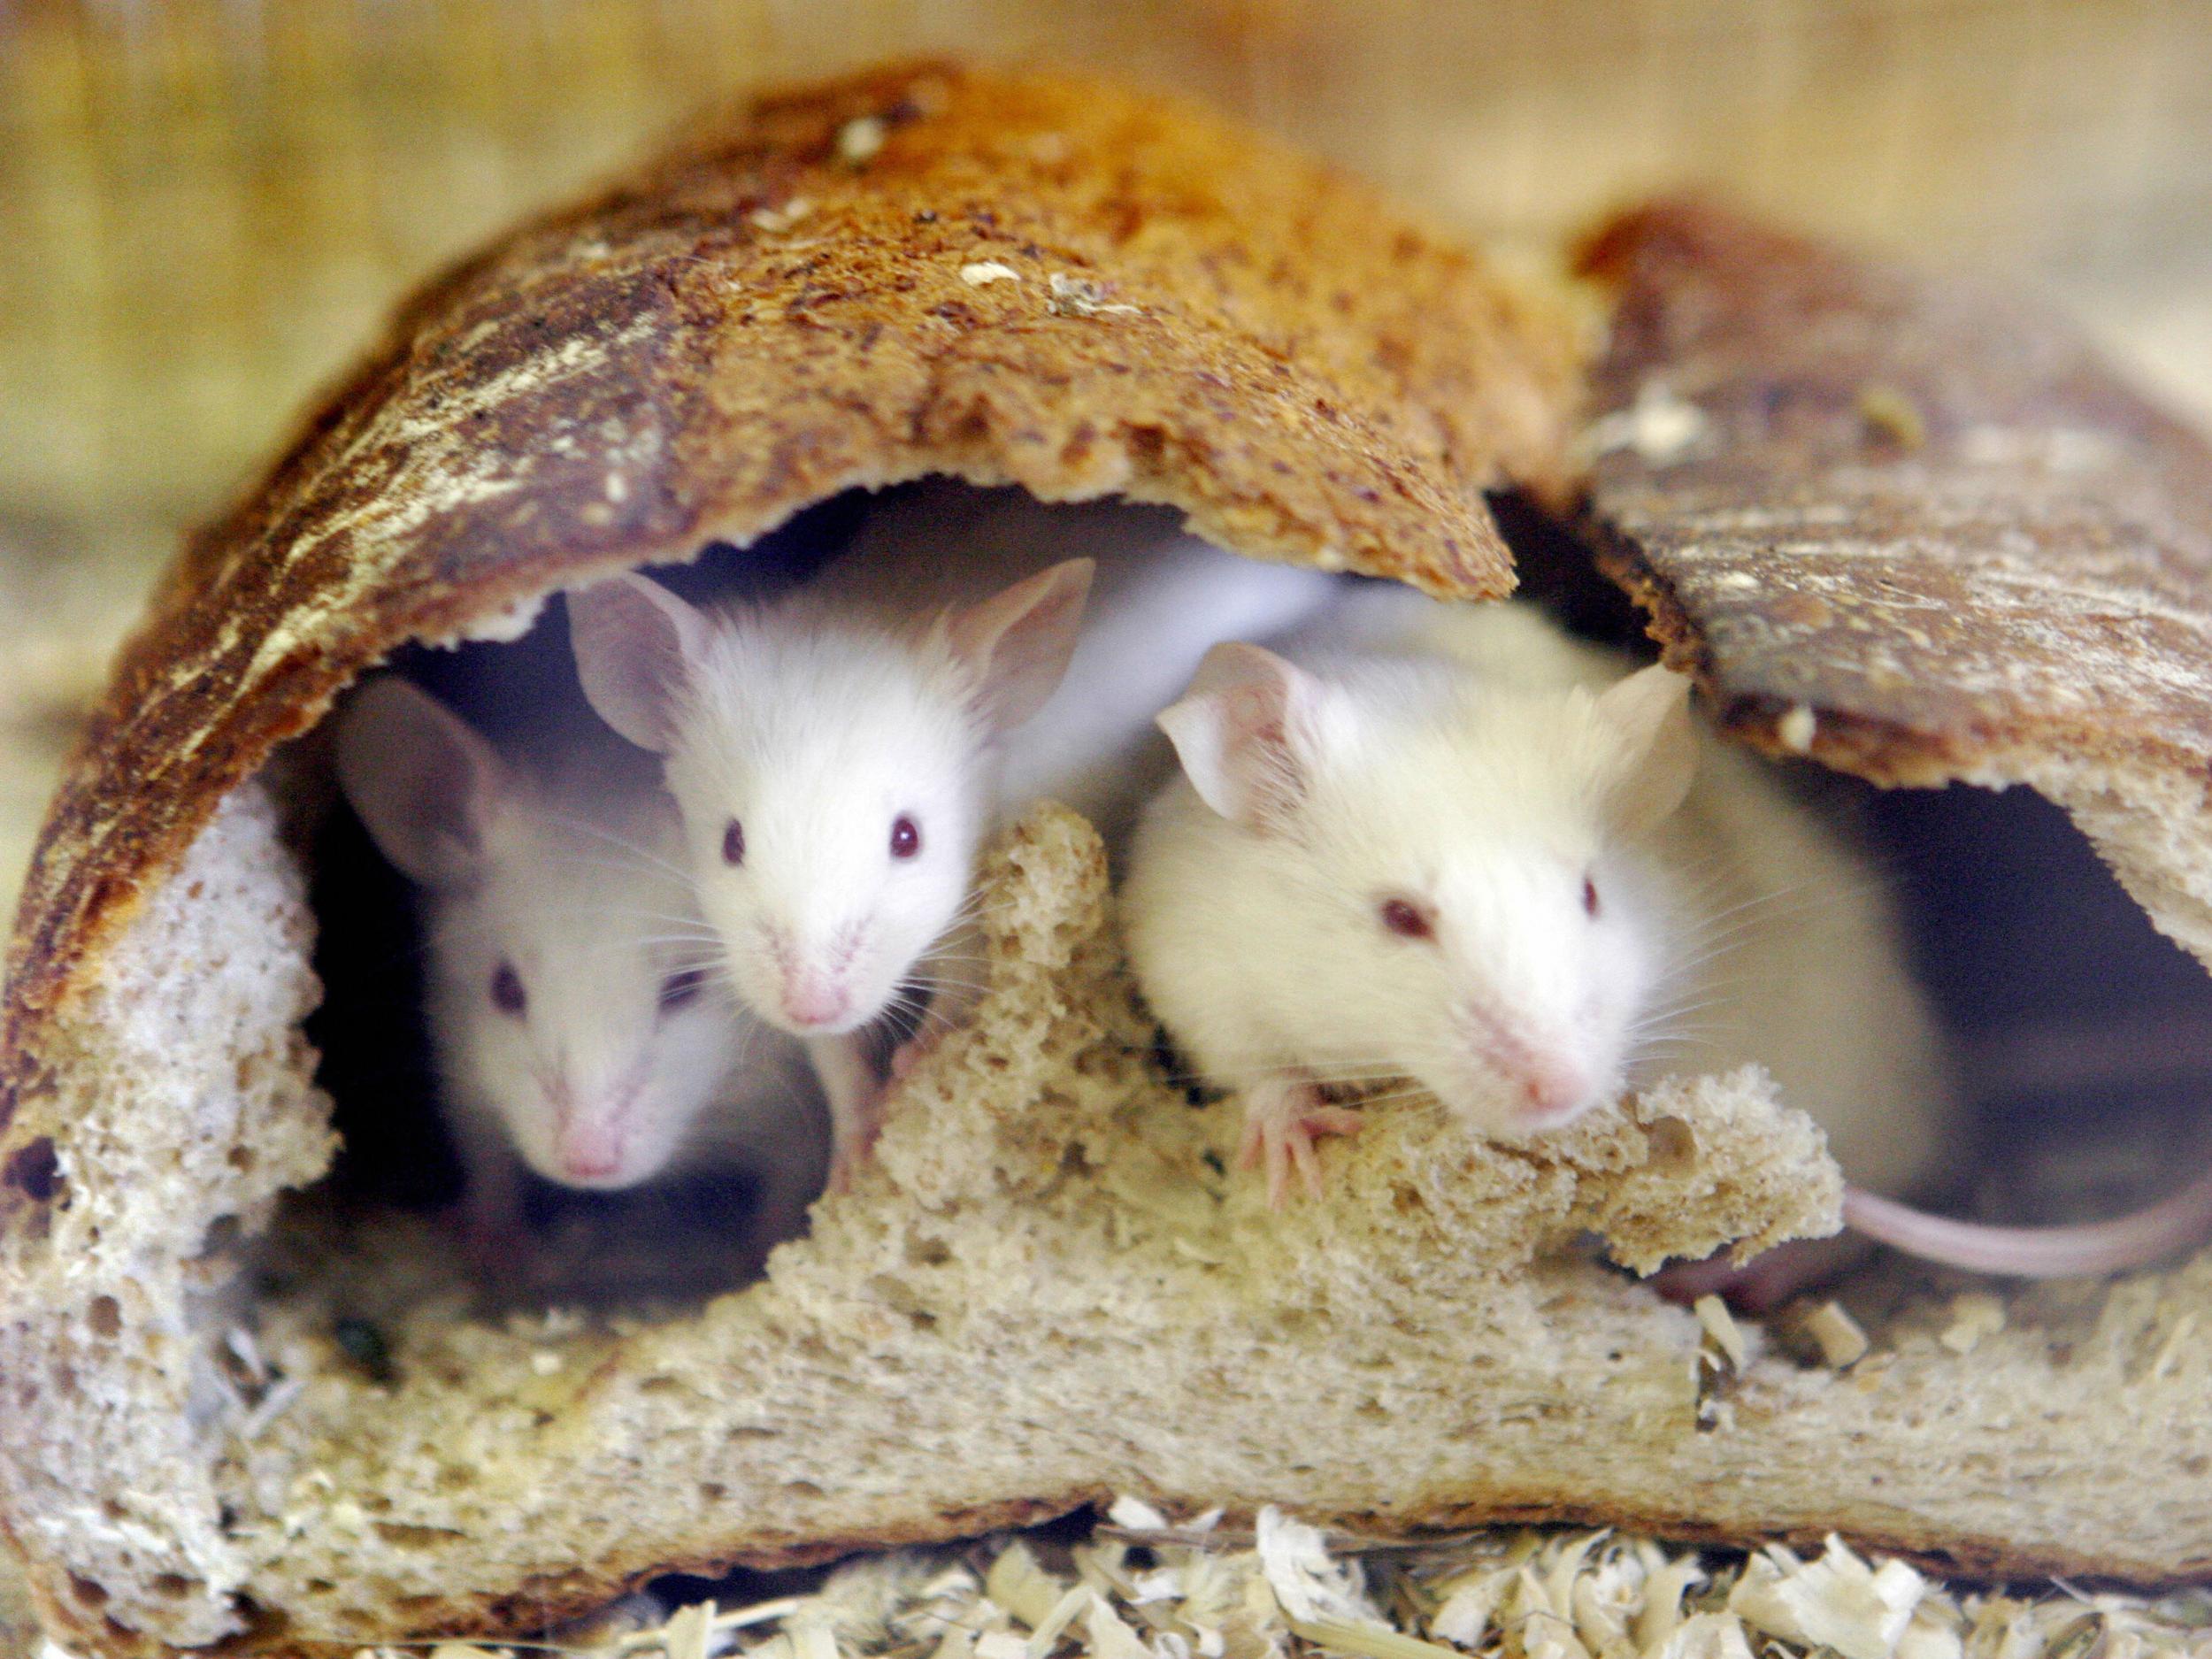 Mice peer out from a loaf of bread